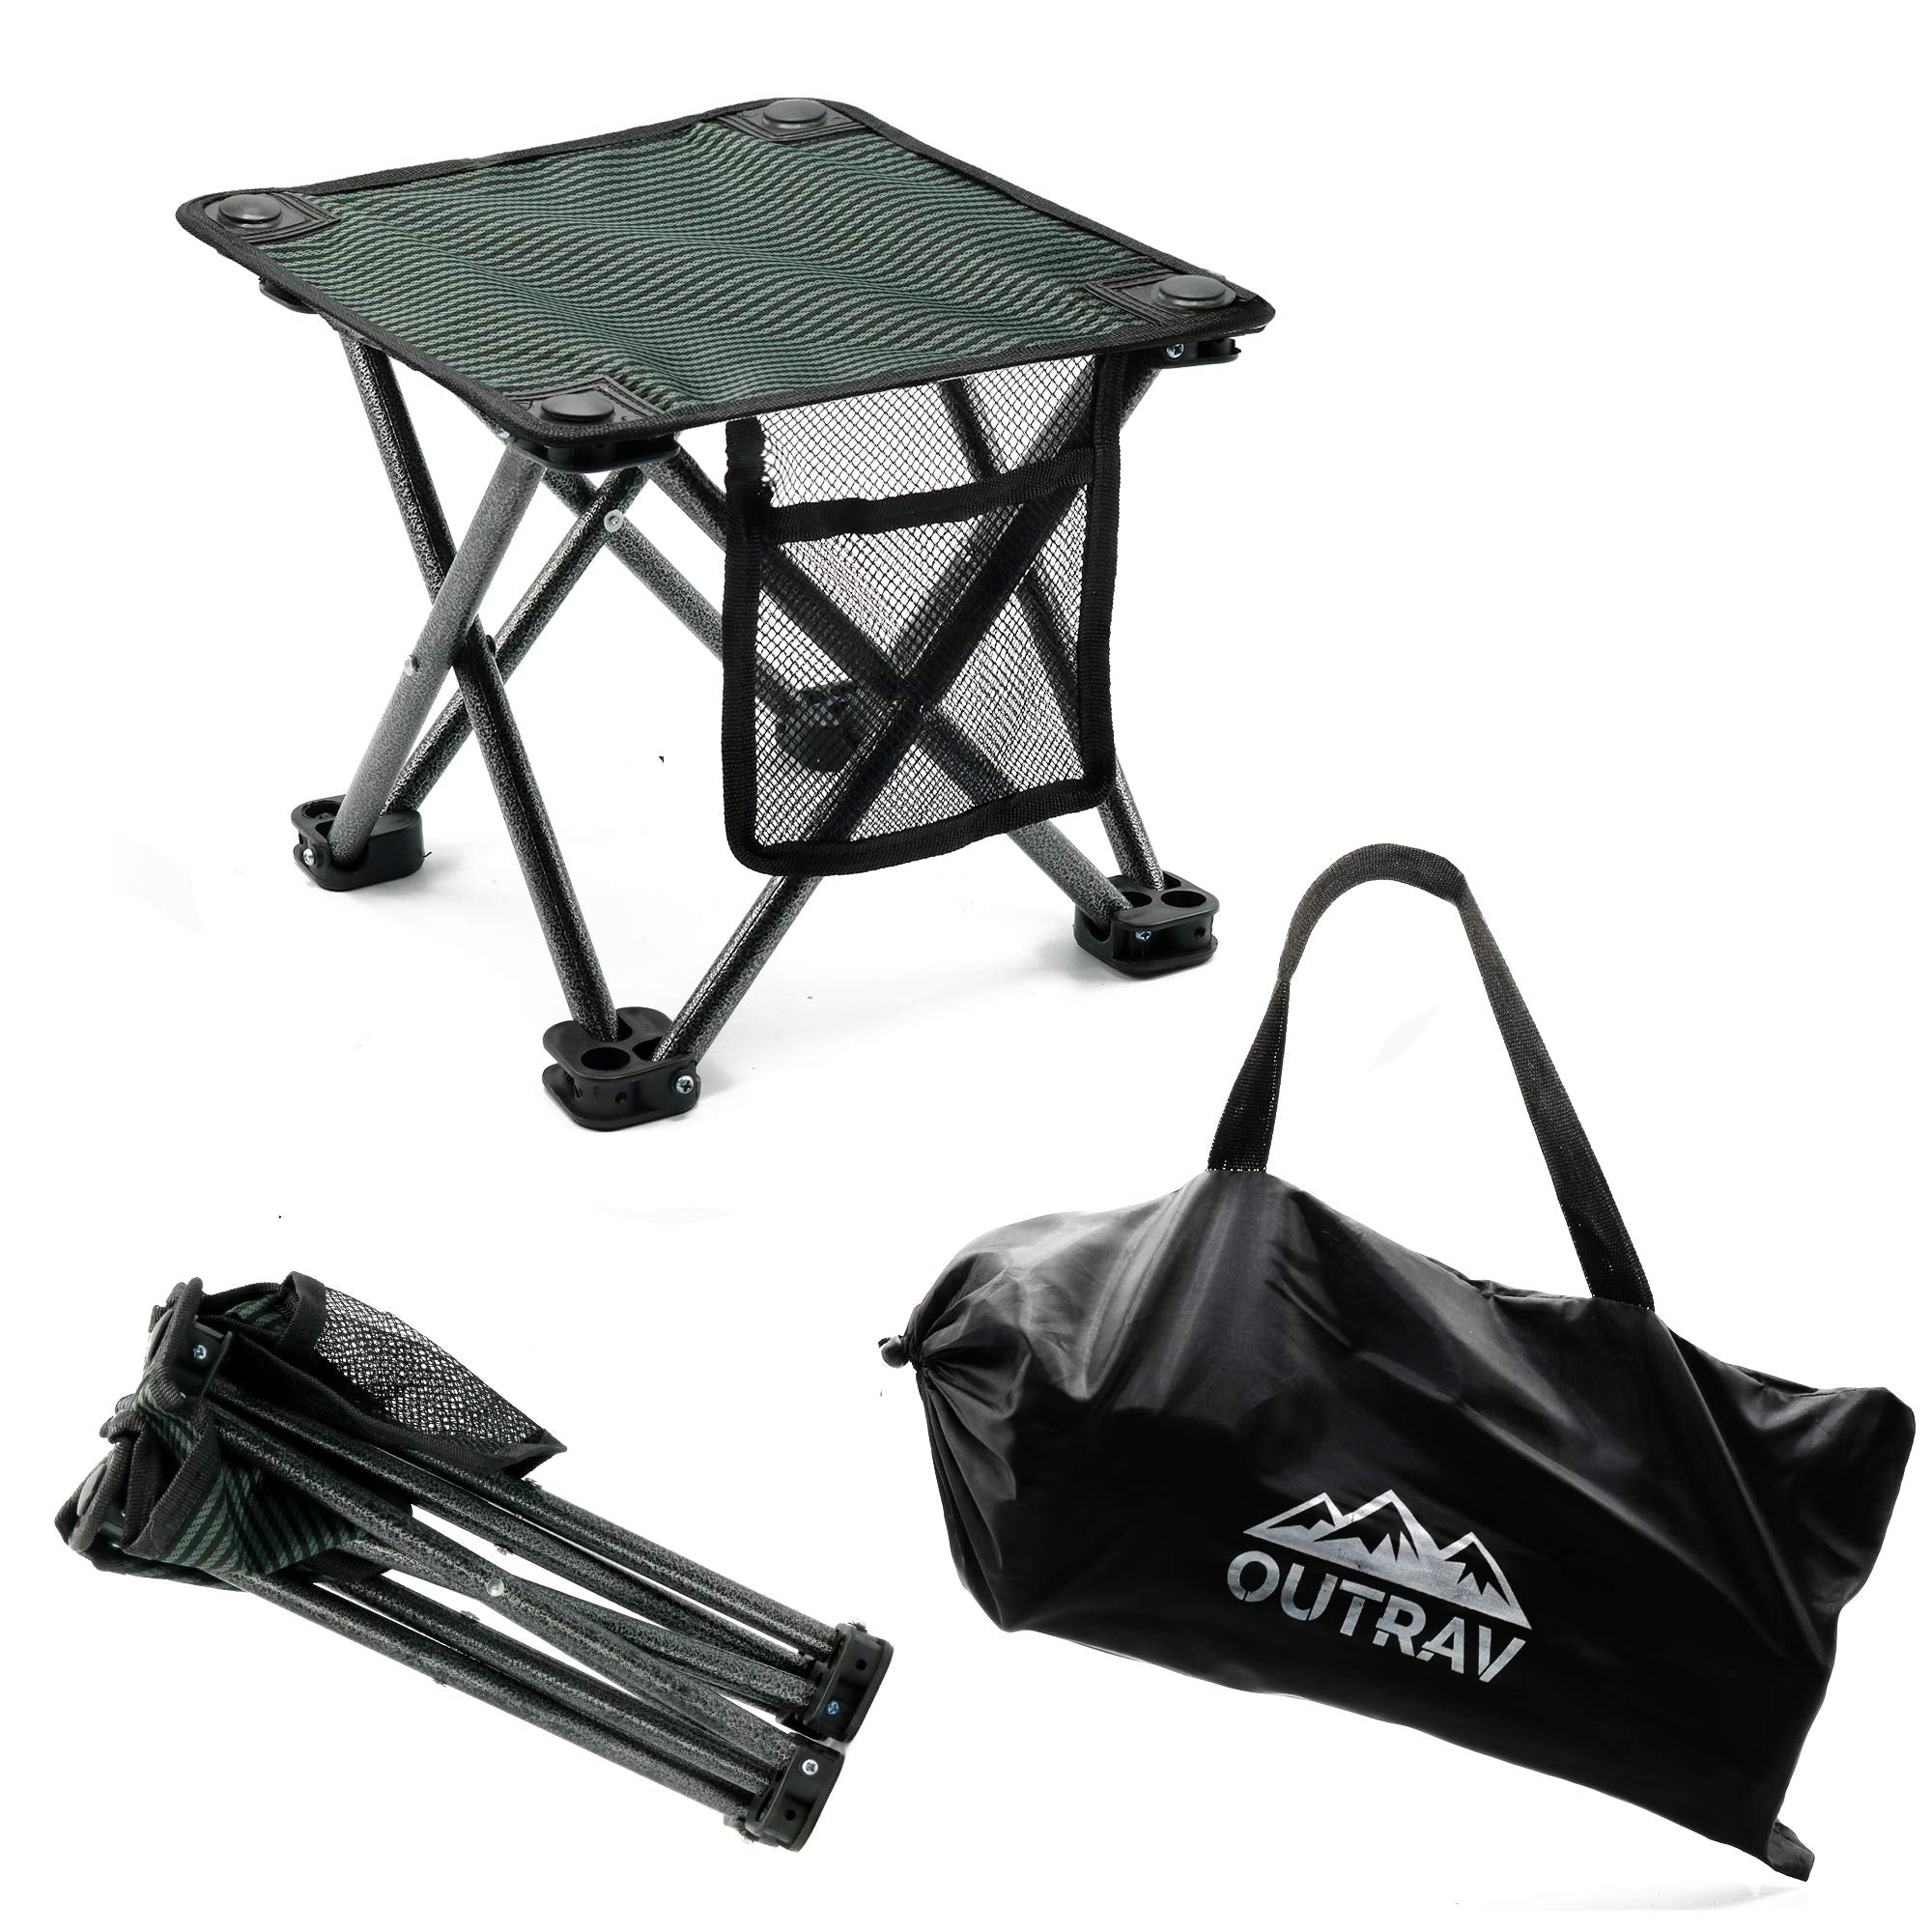 Portable Outdoor Folding Stool Oxford Cloth for Camping Fishing Picnic  Chair with Carry Bag (Black)